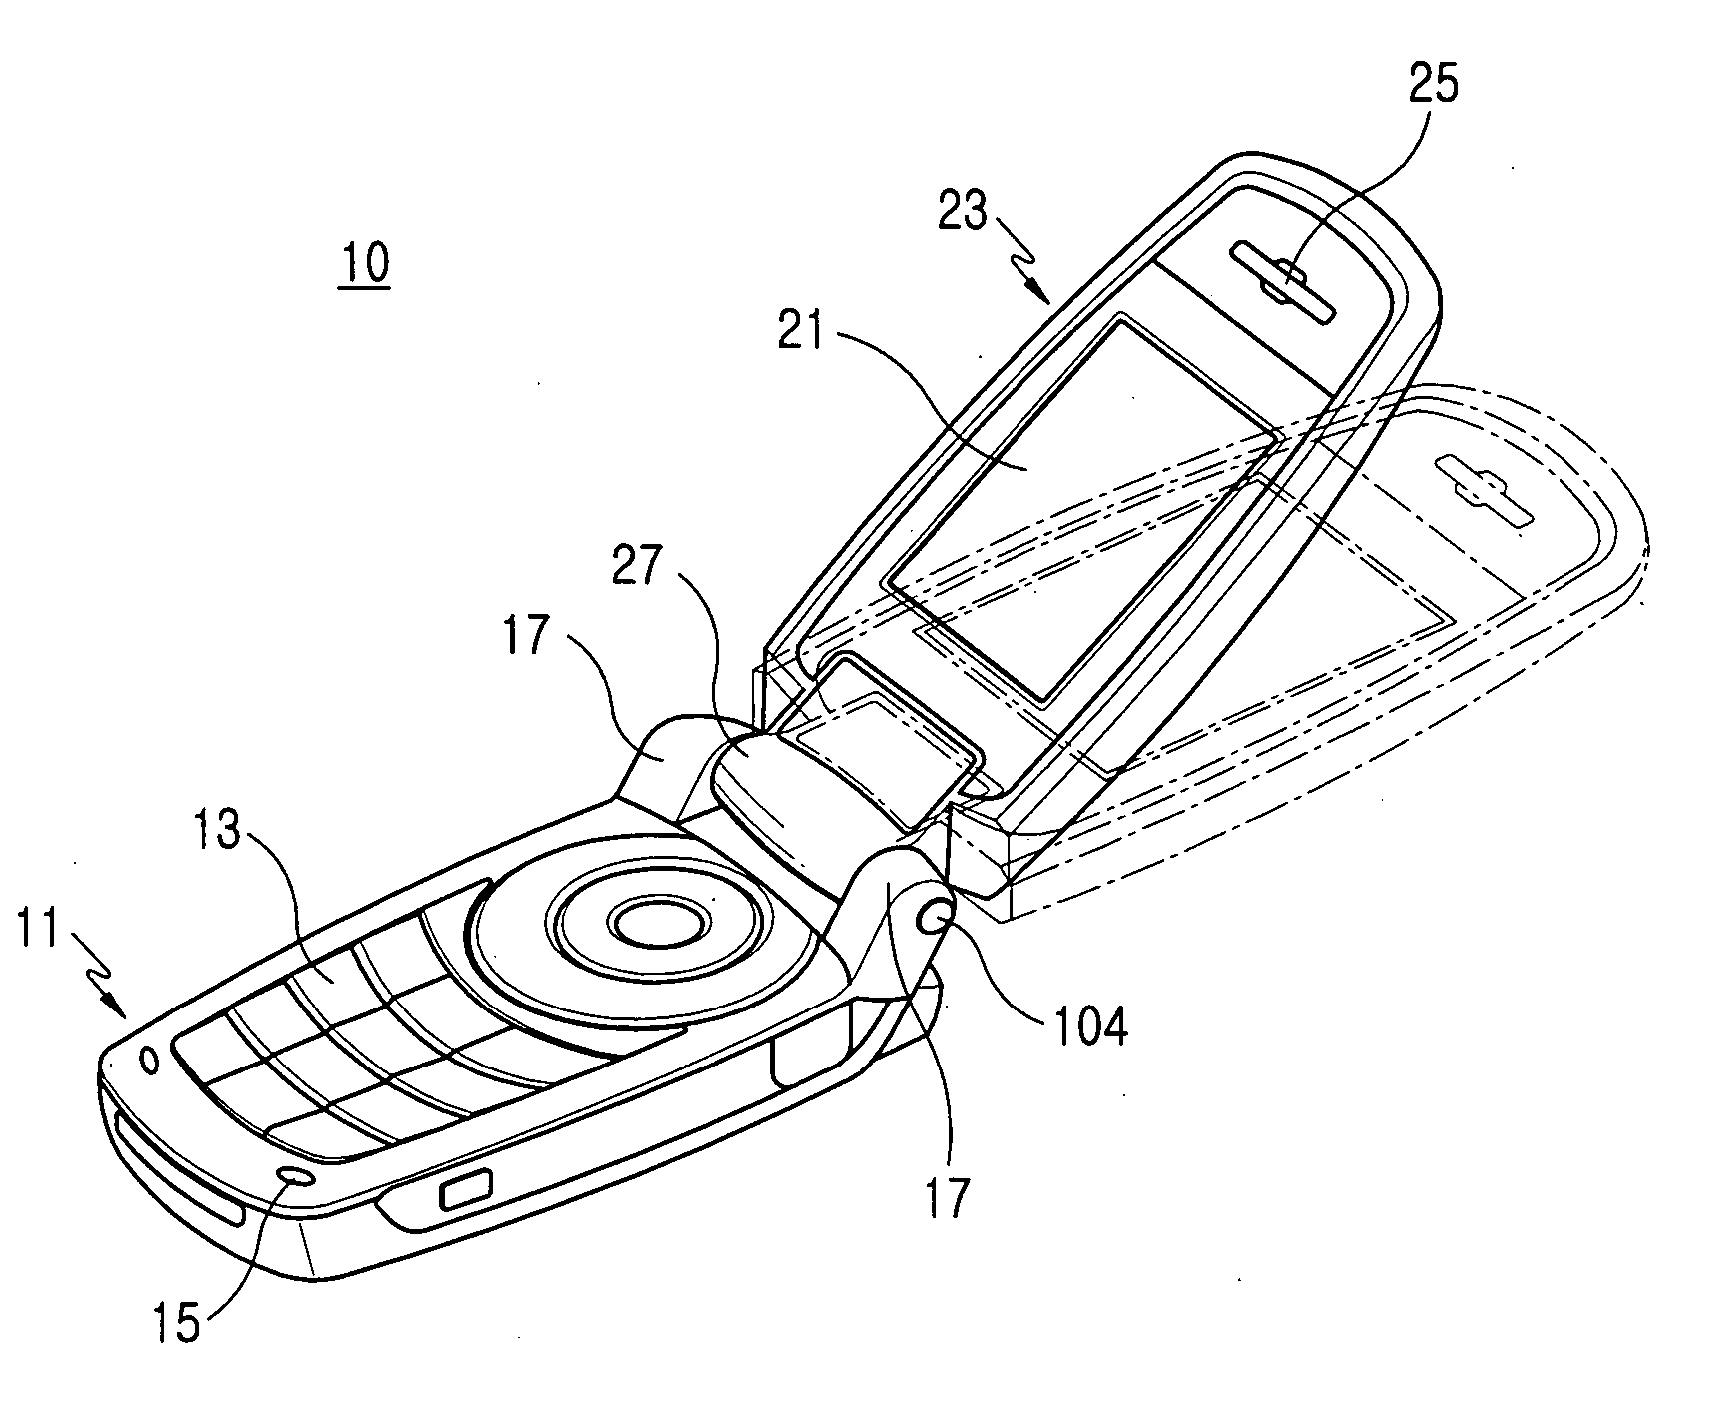 Hinge device for mobile terminal